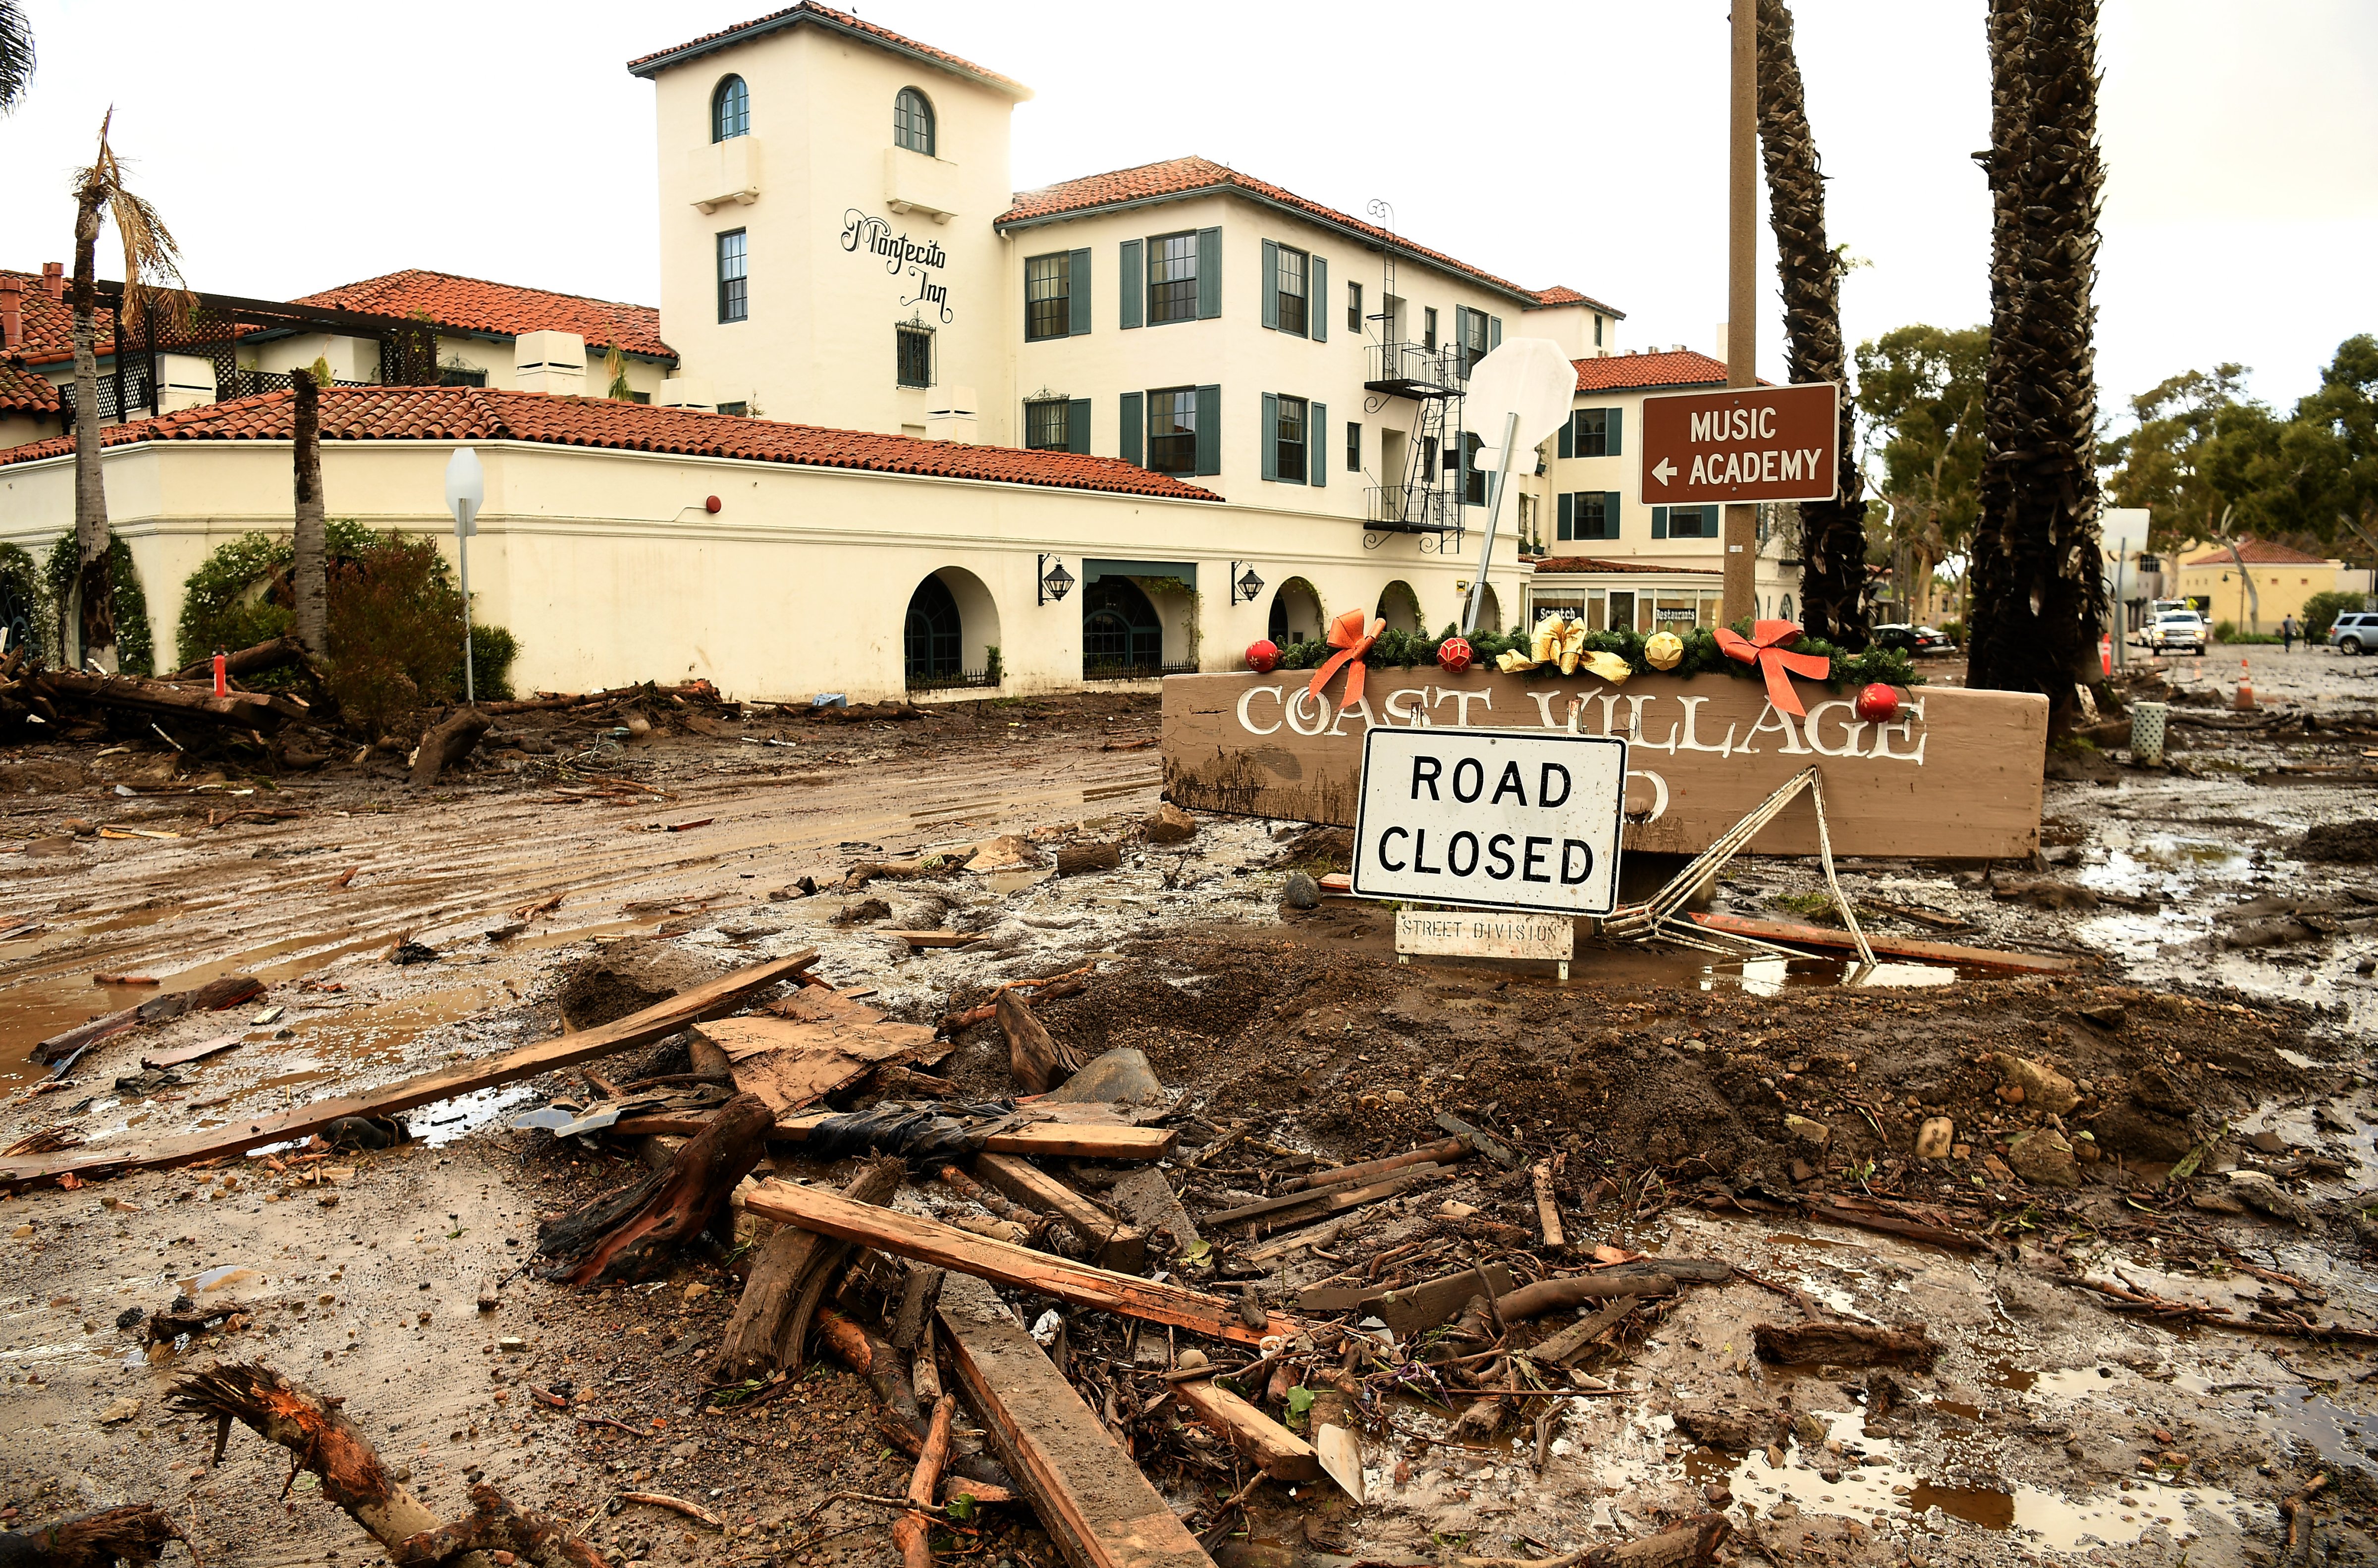 Mud and debris gather outside the Montecito Inn along Olive Mill Road in Montecito after a major storm hit the burn area January 9, 2018 in Montecito, California. (Wally Skalij—LA Times via Getty Images)